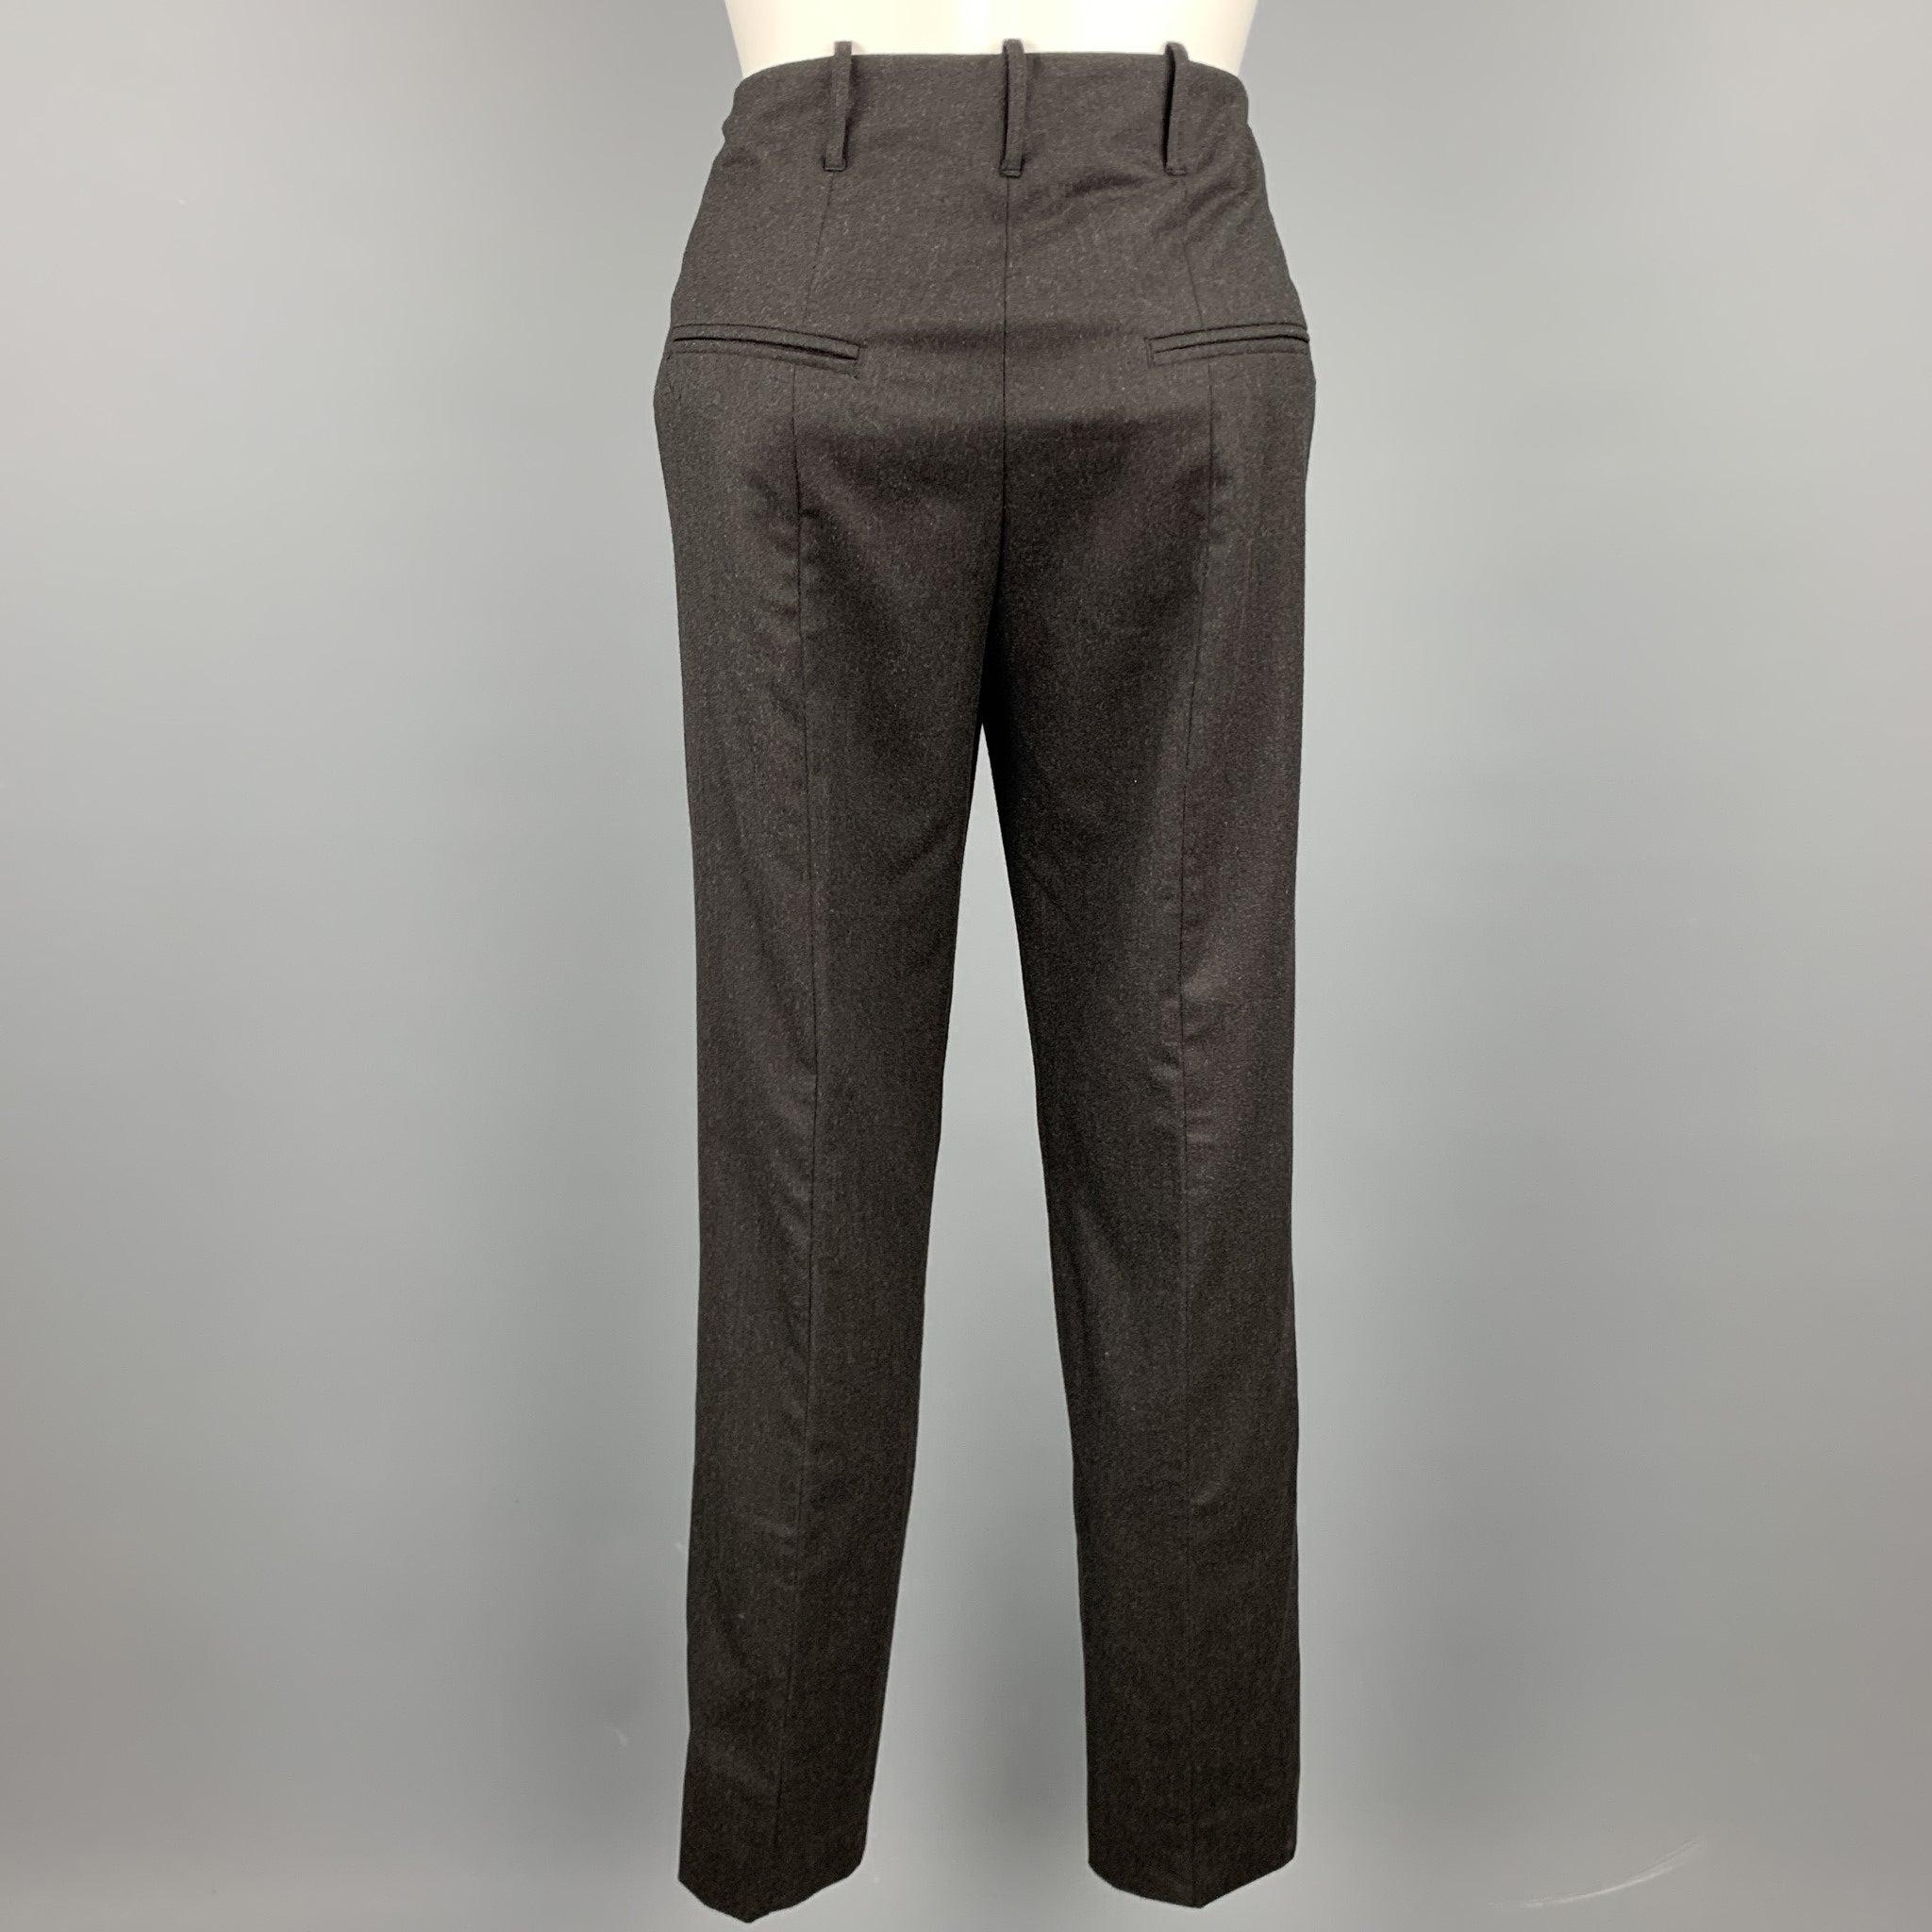 JIL SANDER Size 0 Charcoal Virgin Wool Straight Leg Dress Pants In Good Condition For Sale In San Francisco, CA